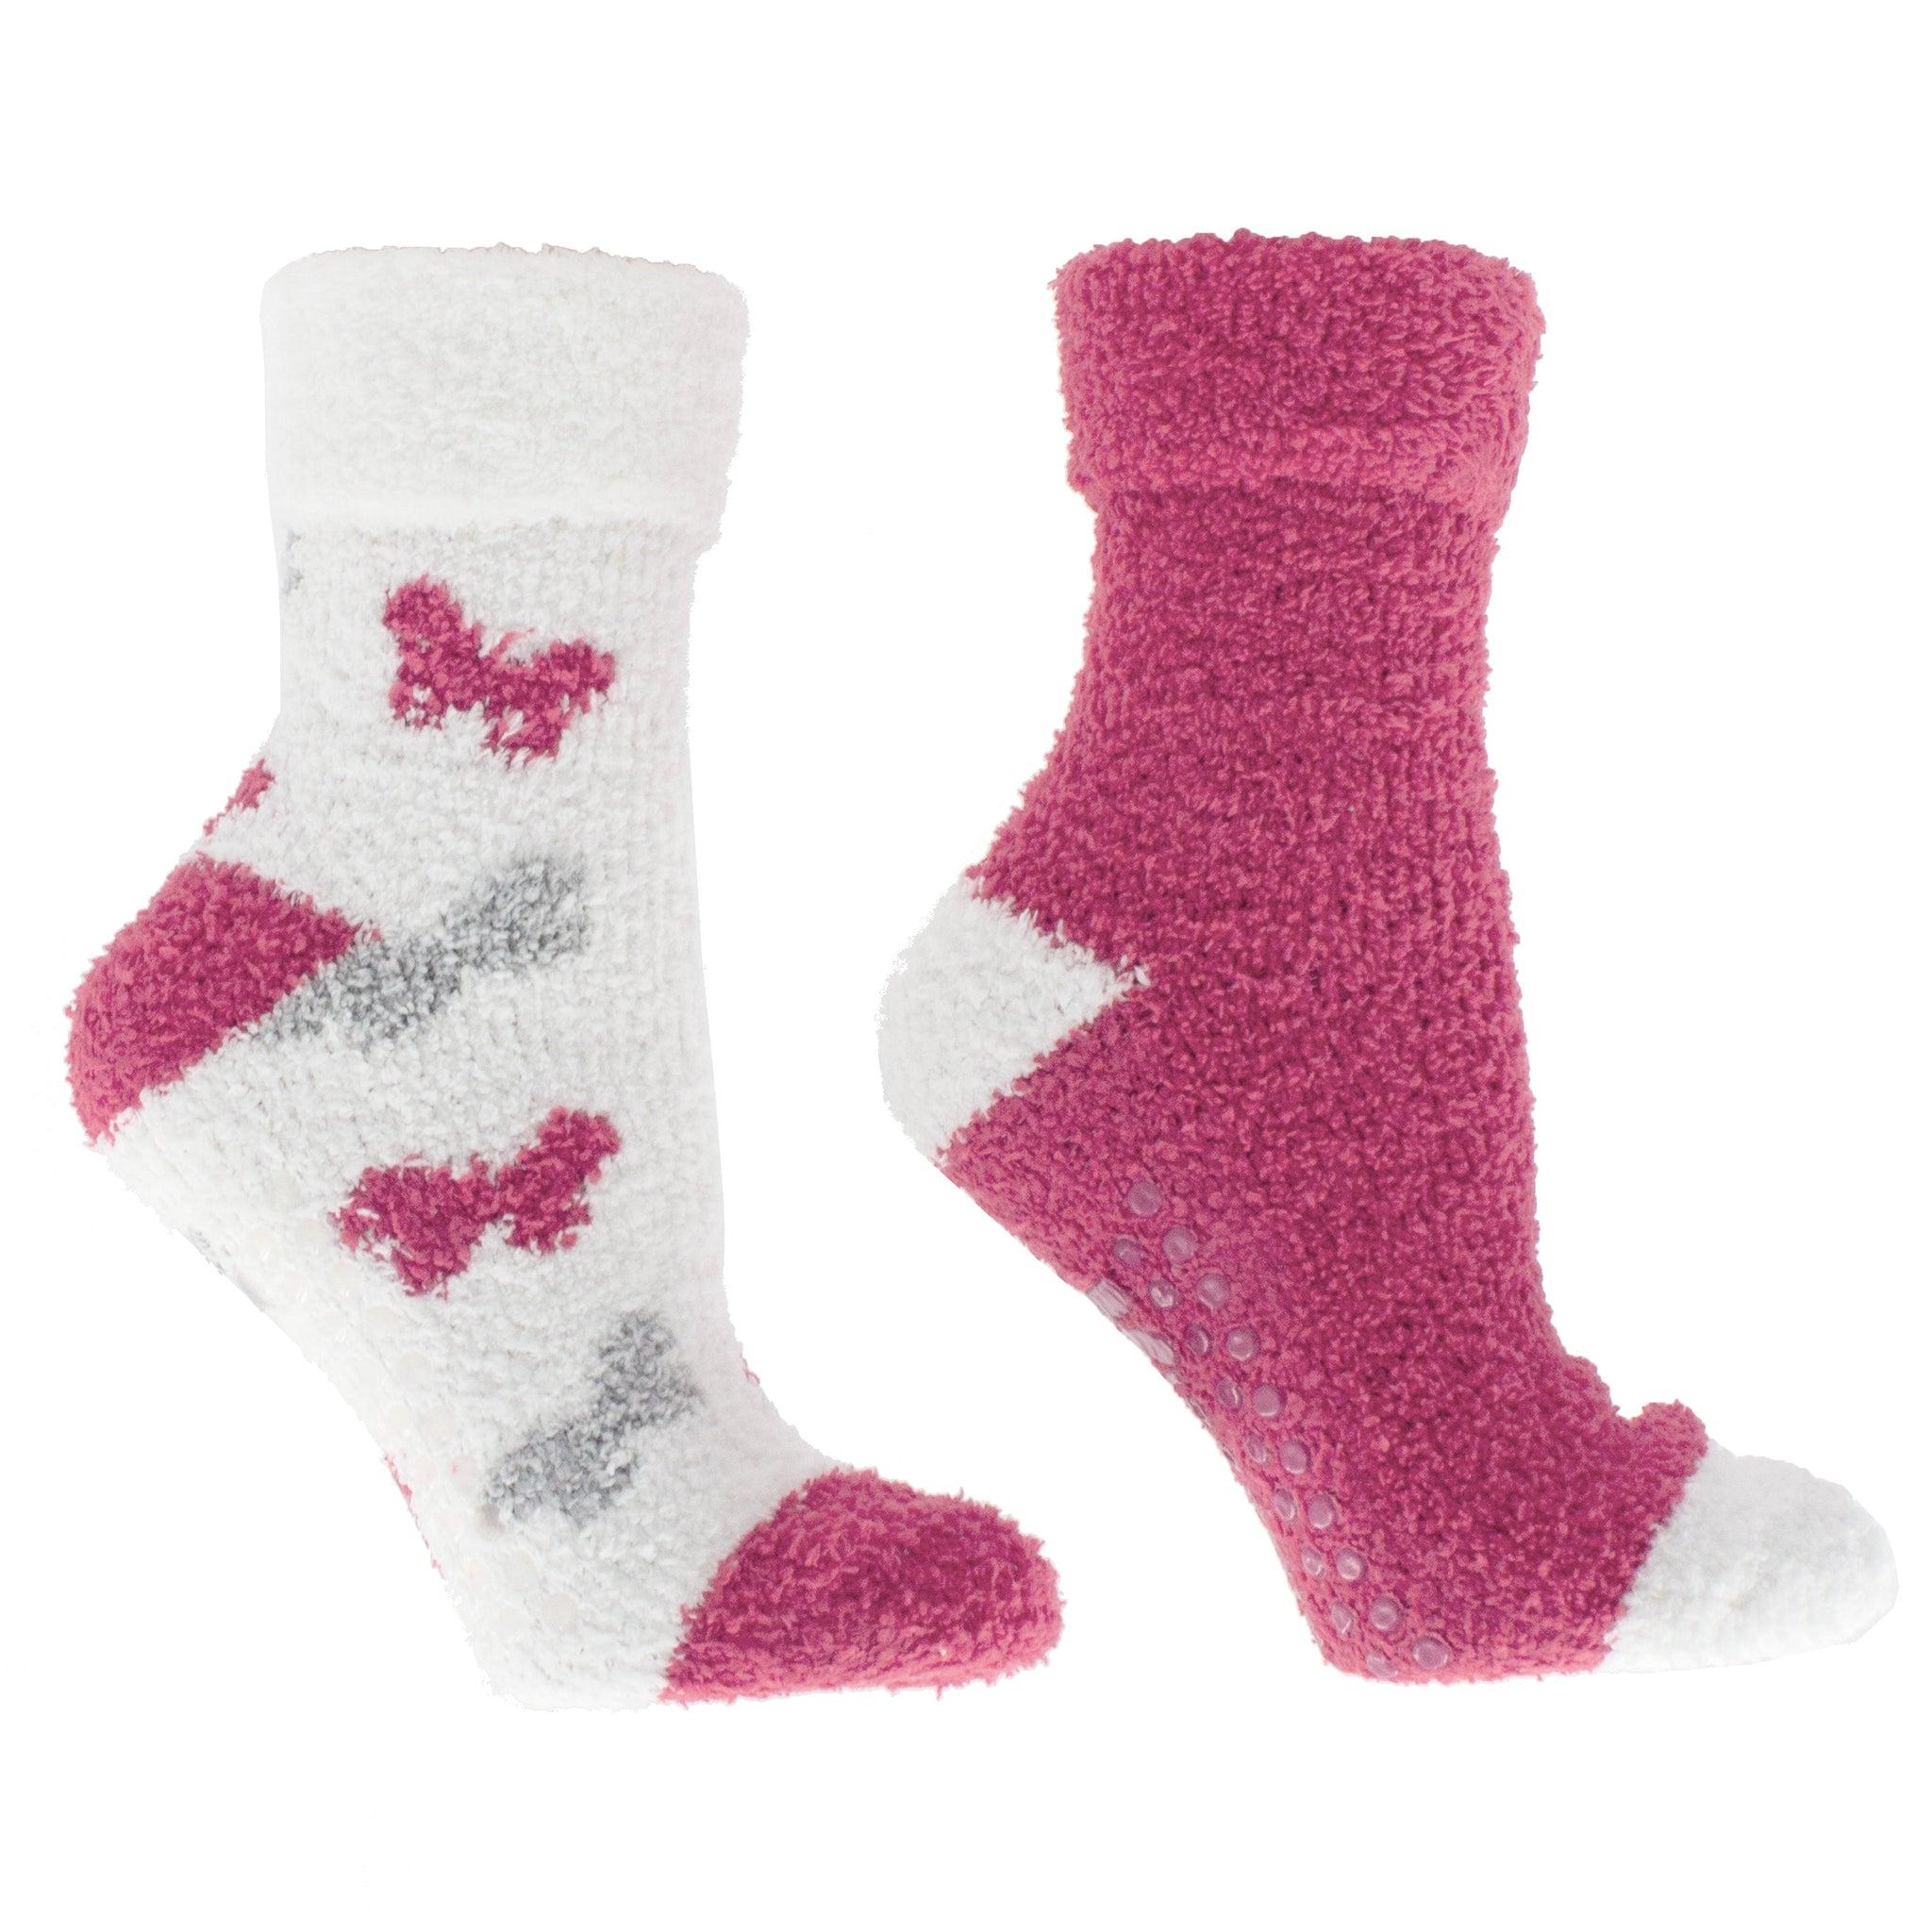 Double Layer Non-Skid Warm Soft and Fuzzy Slipper Socks With Lavender